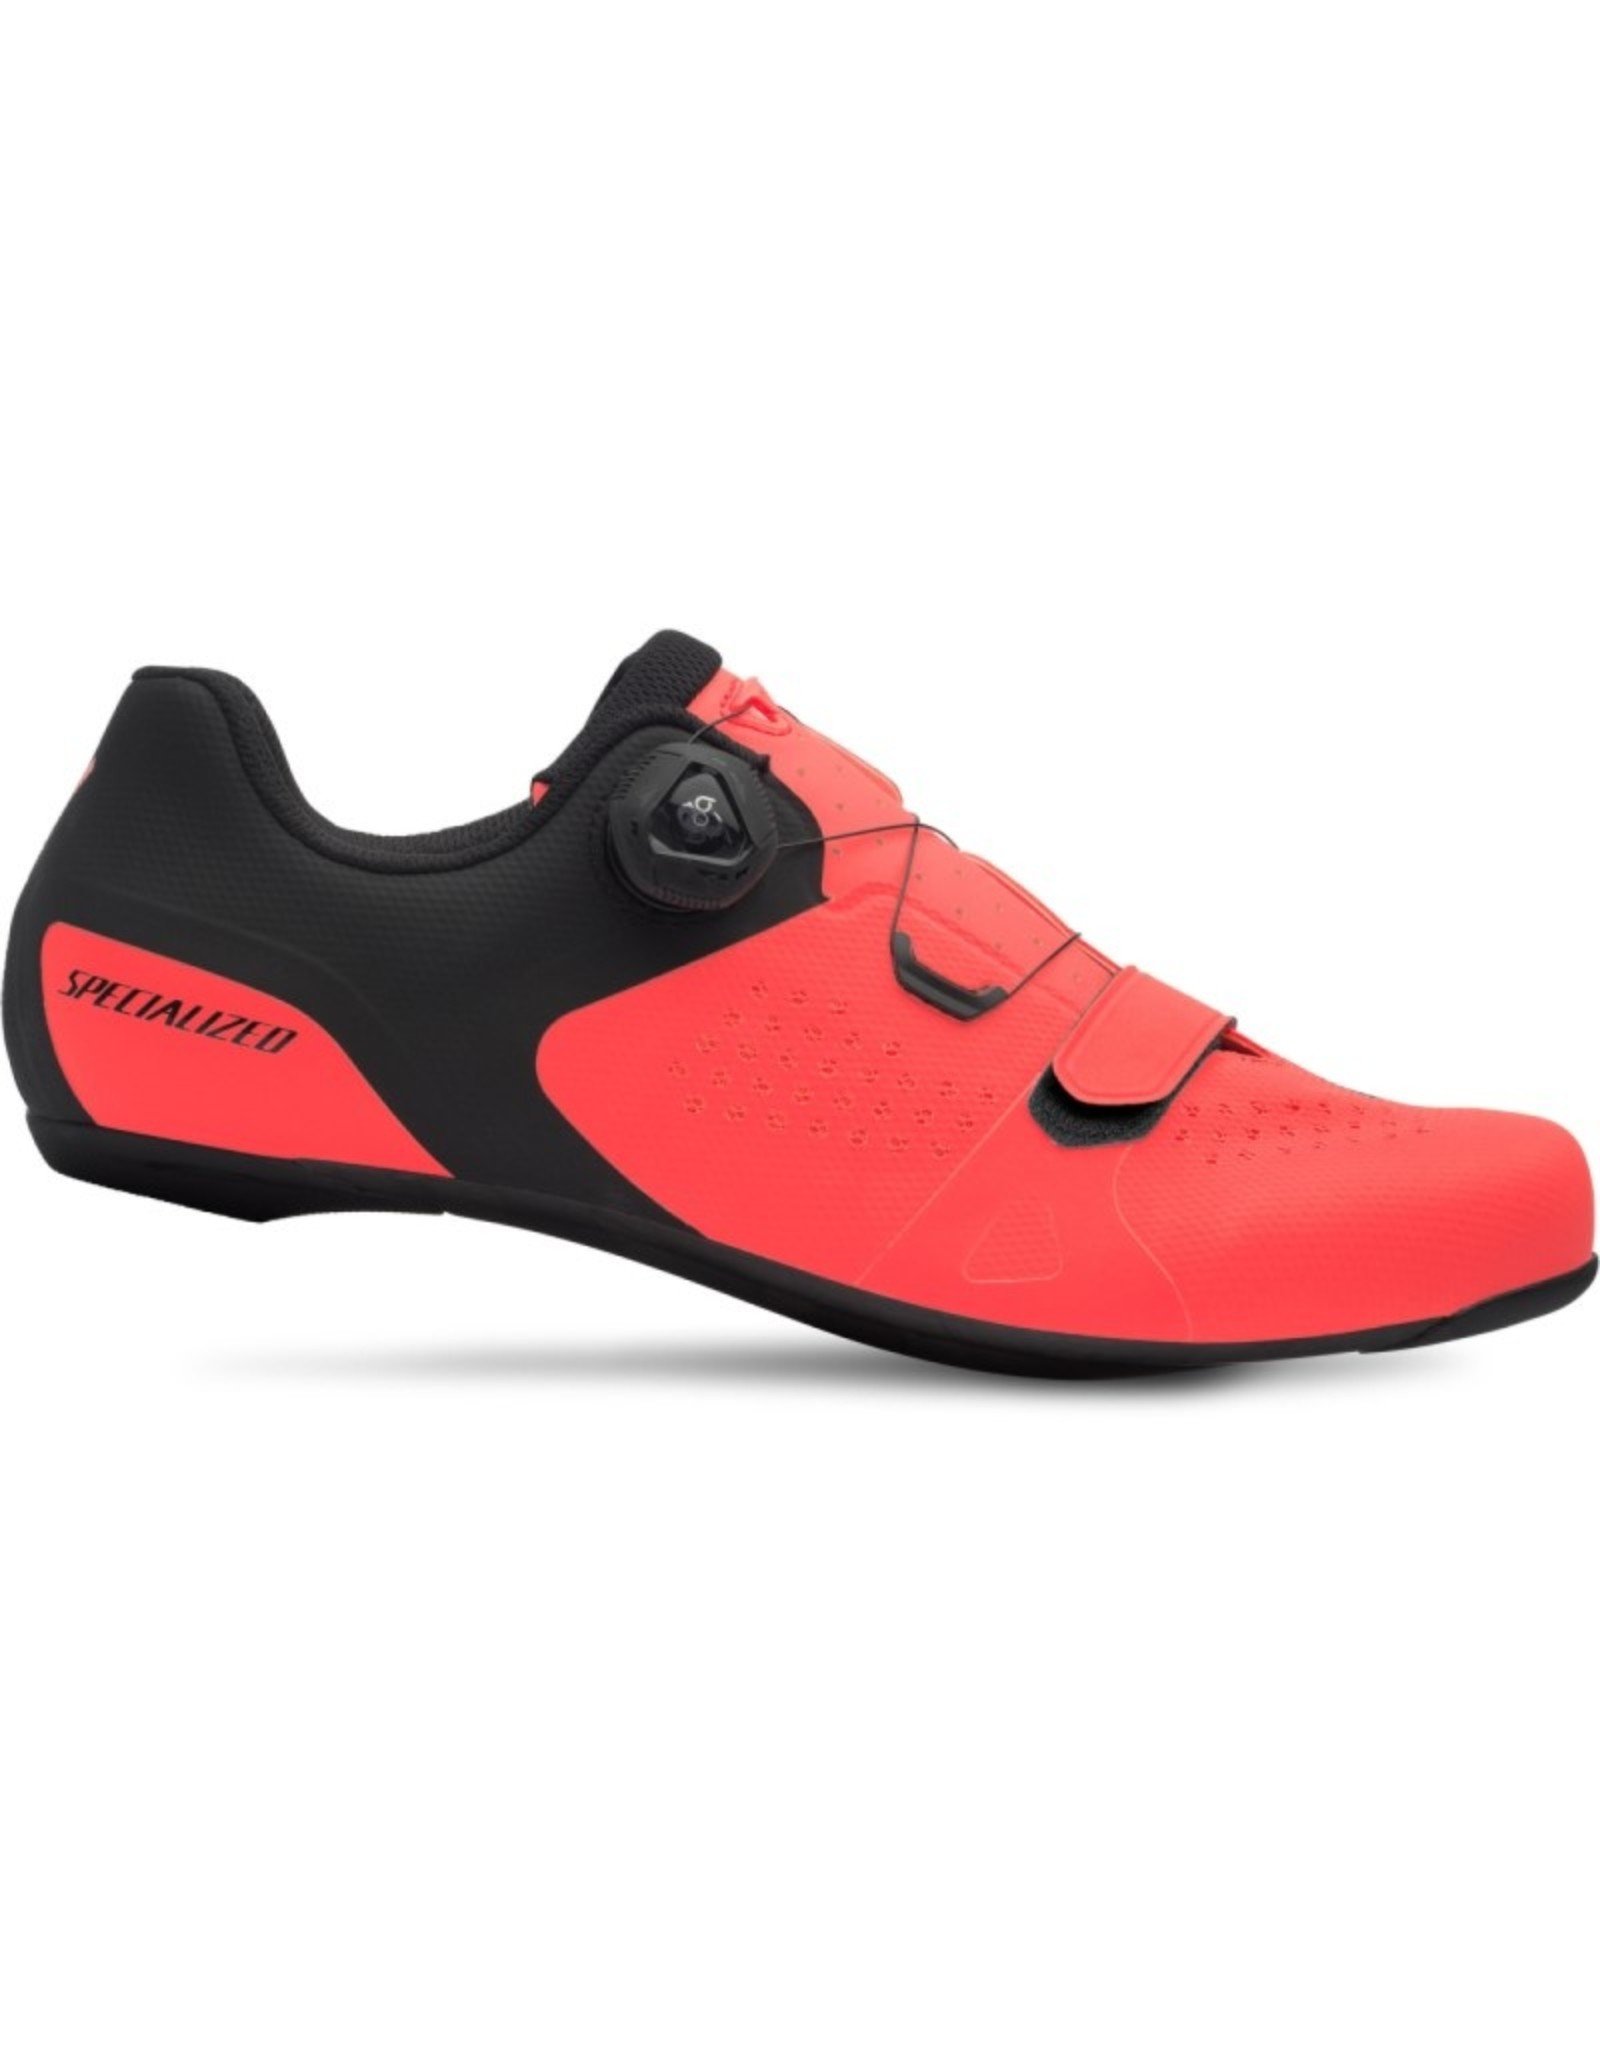 Specialized Torch 2.0 Road Shoe